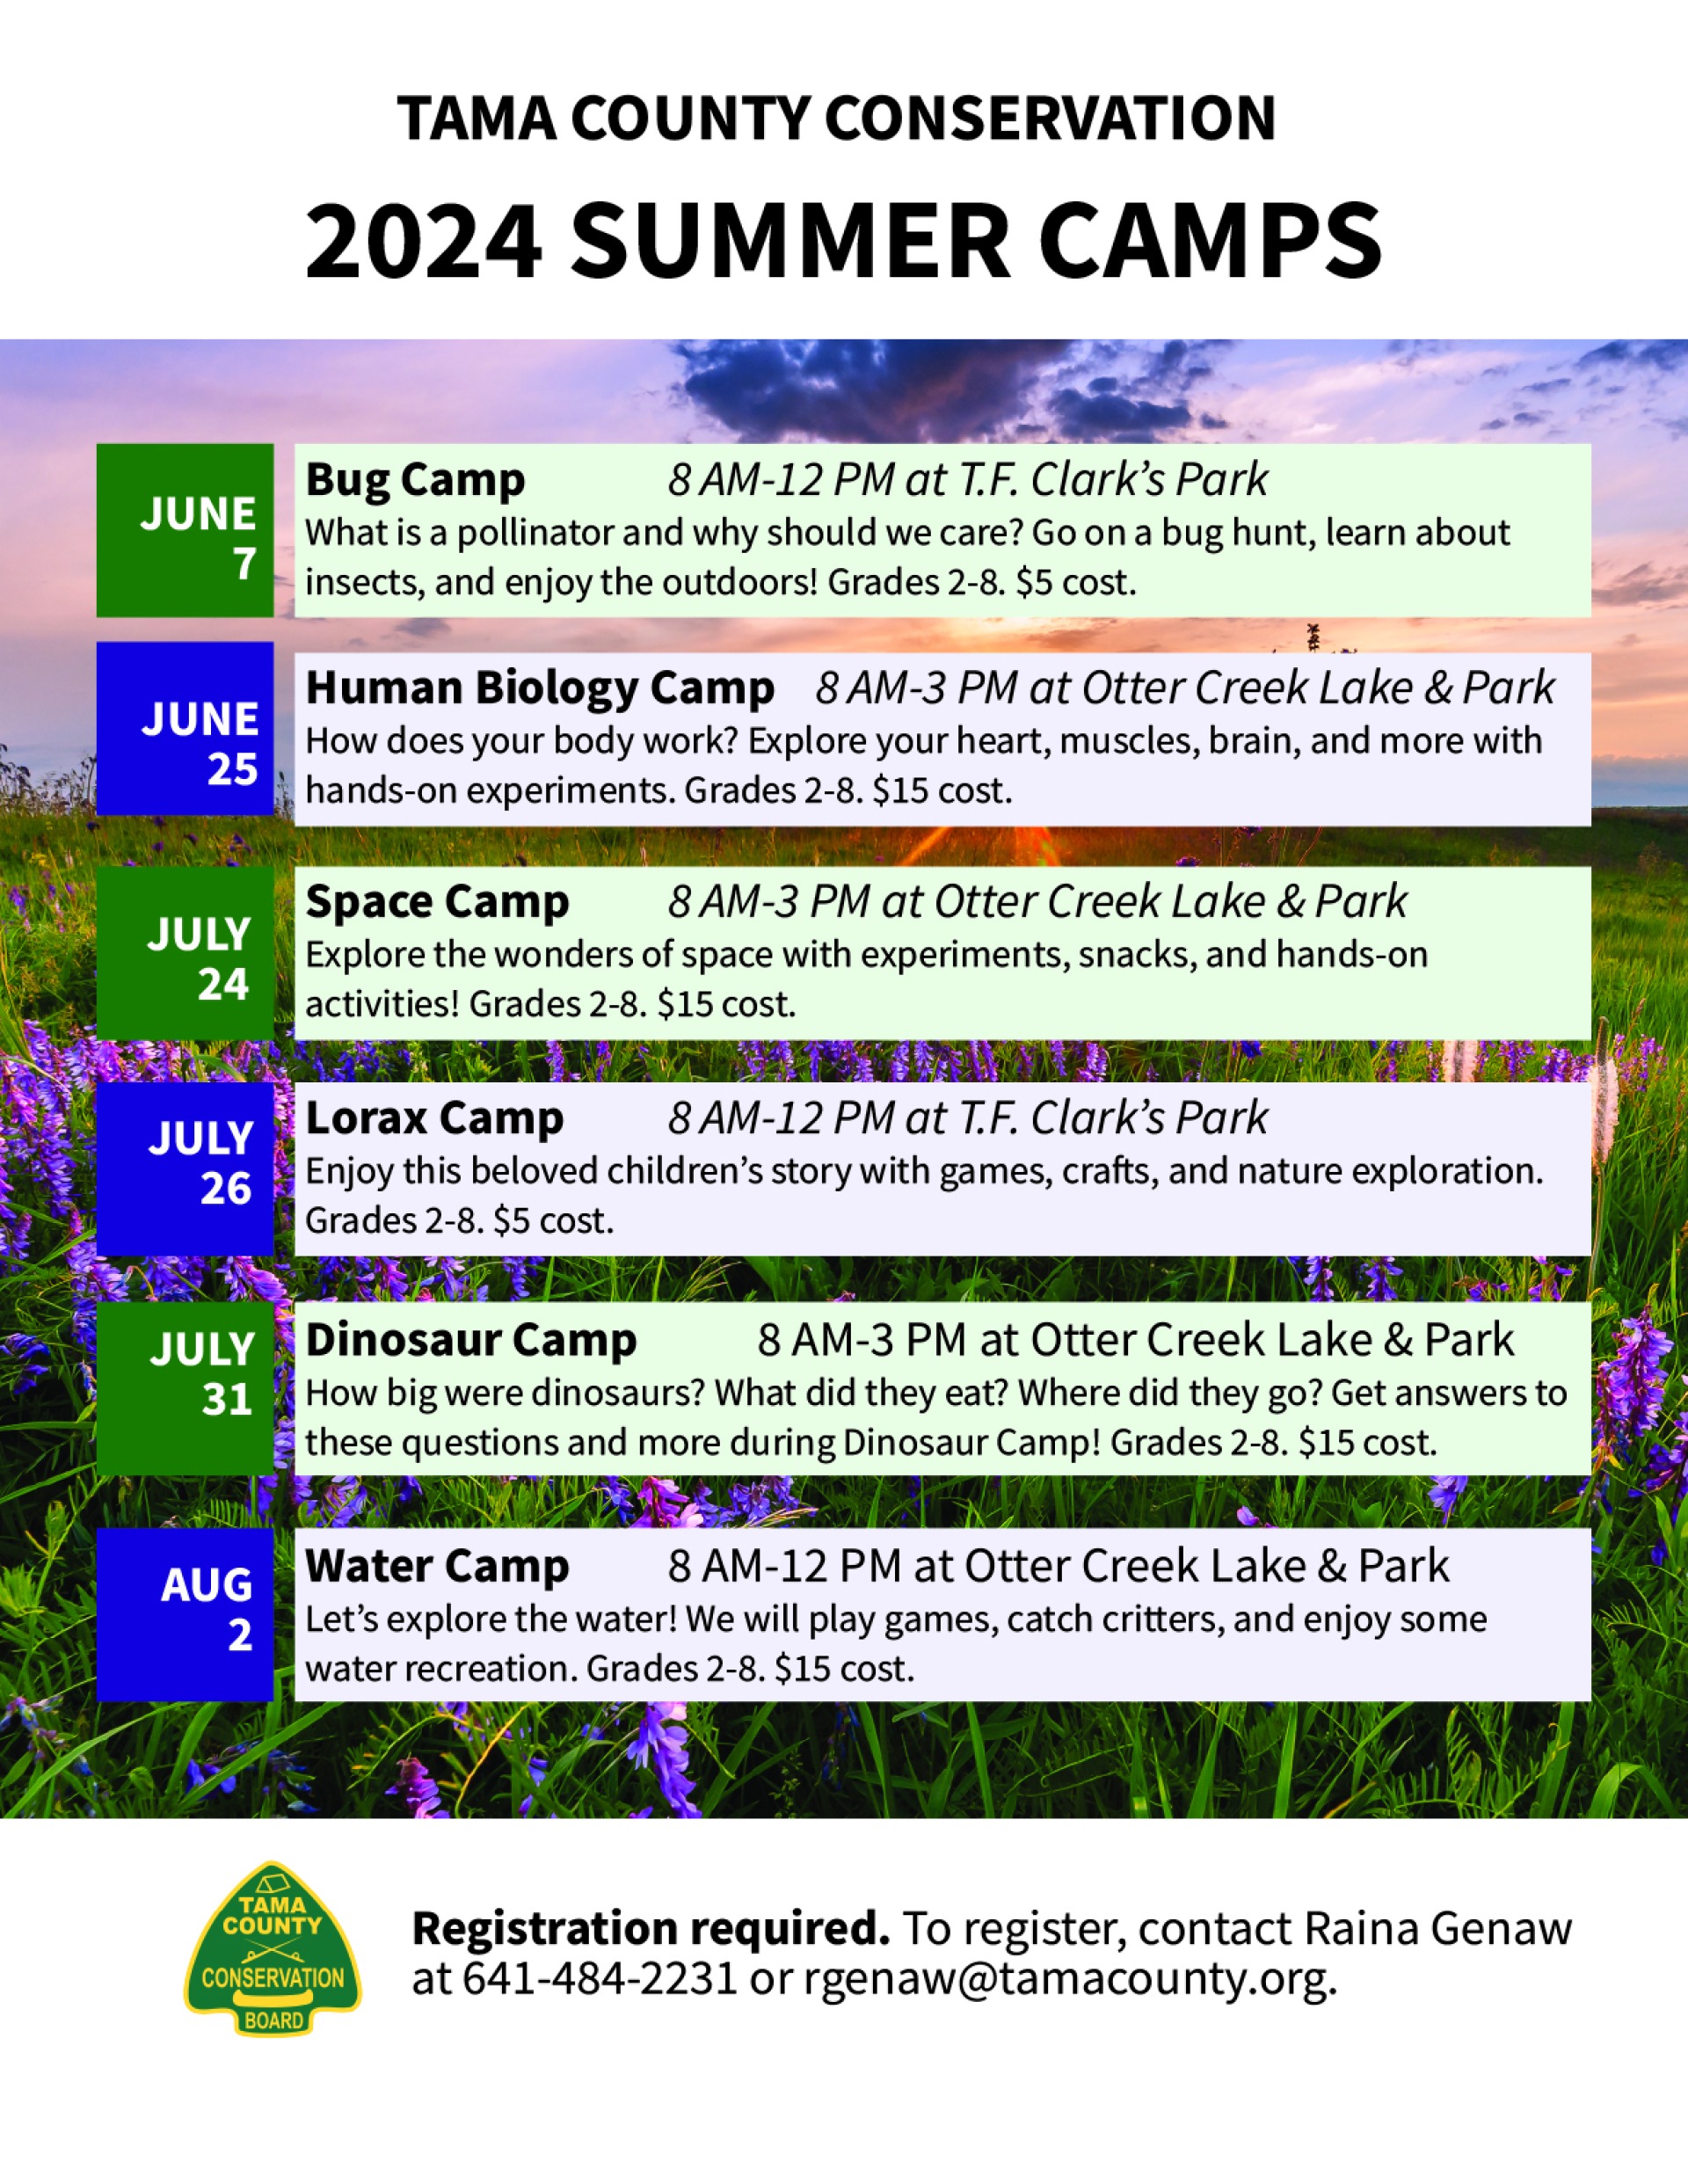 Summer camp poster with dates and descriptions